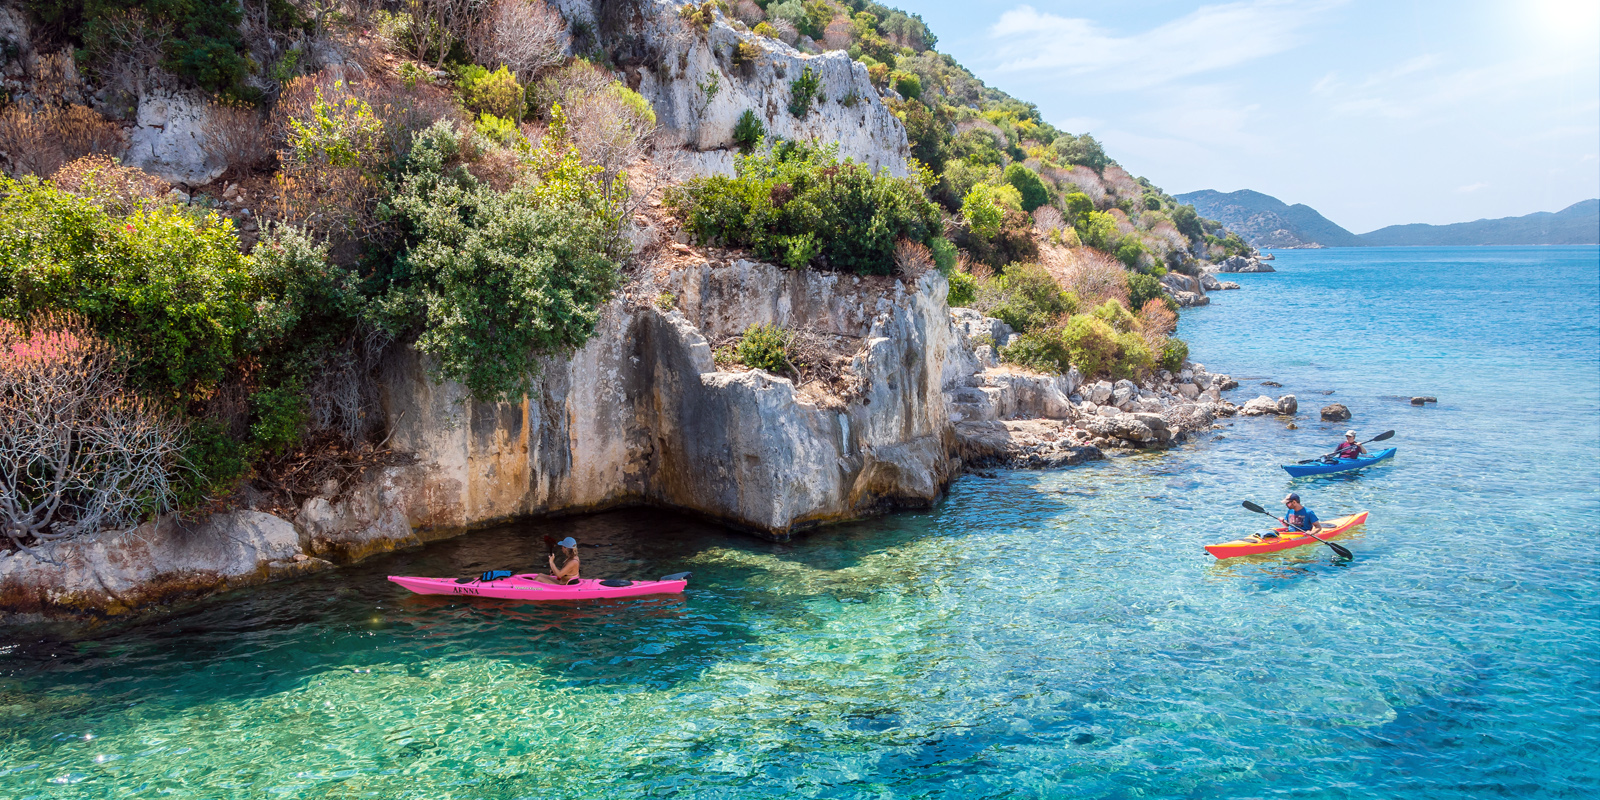 Image of Tourists Canoeing during Vacation in Türkiye